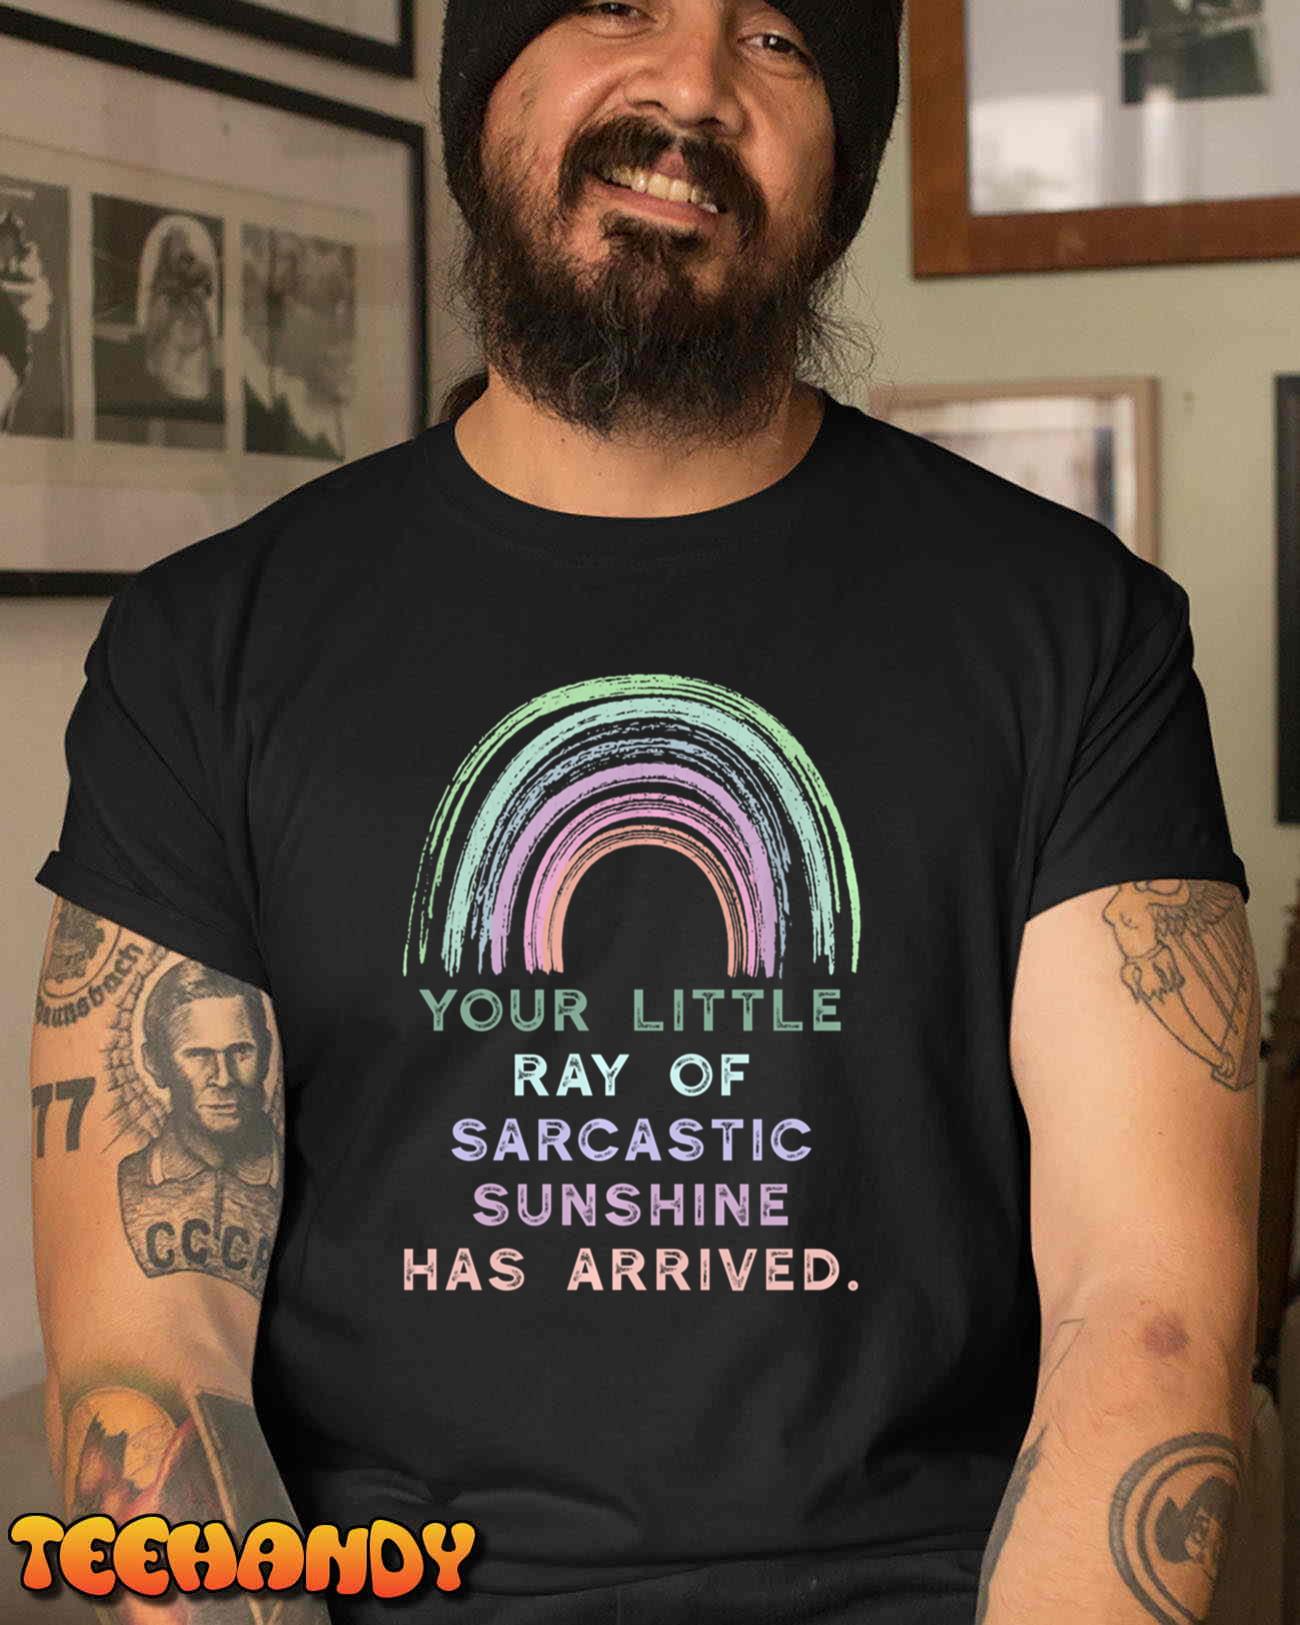 Your Little Ray of Sarcastic Sunshine Has Arrived Rainbow Pullover Hoodie